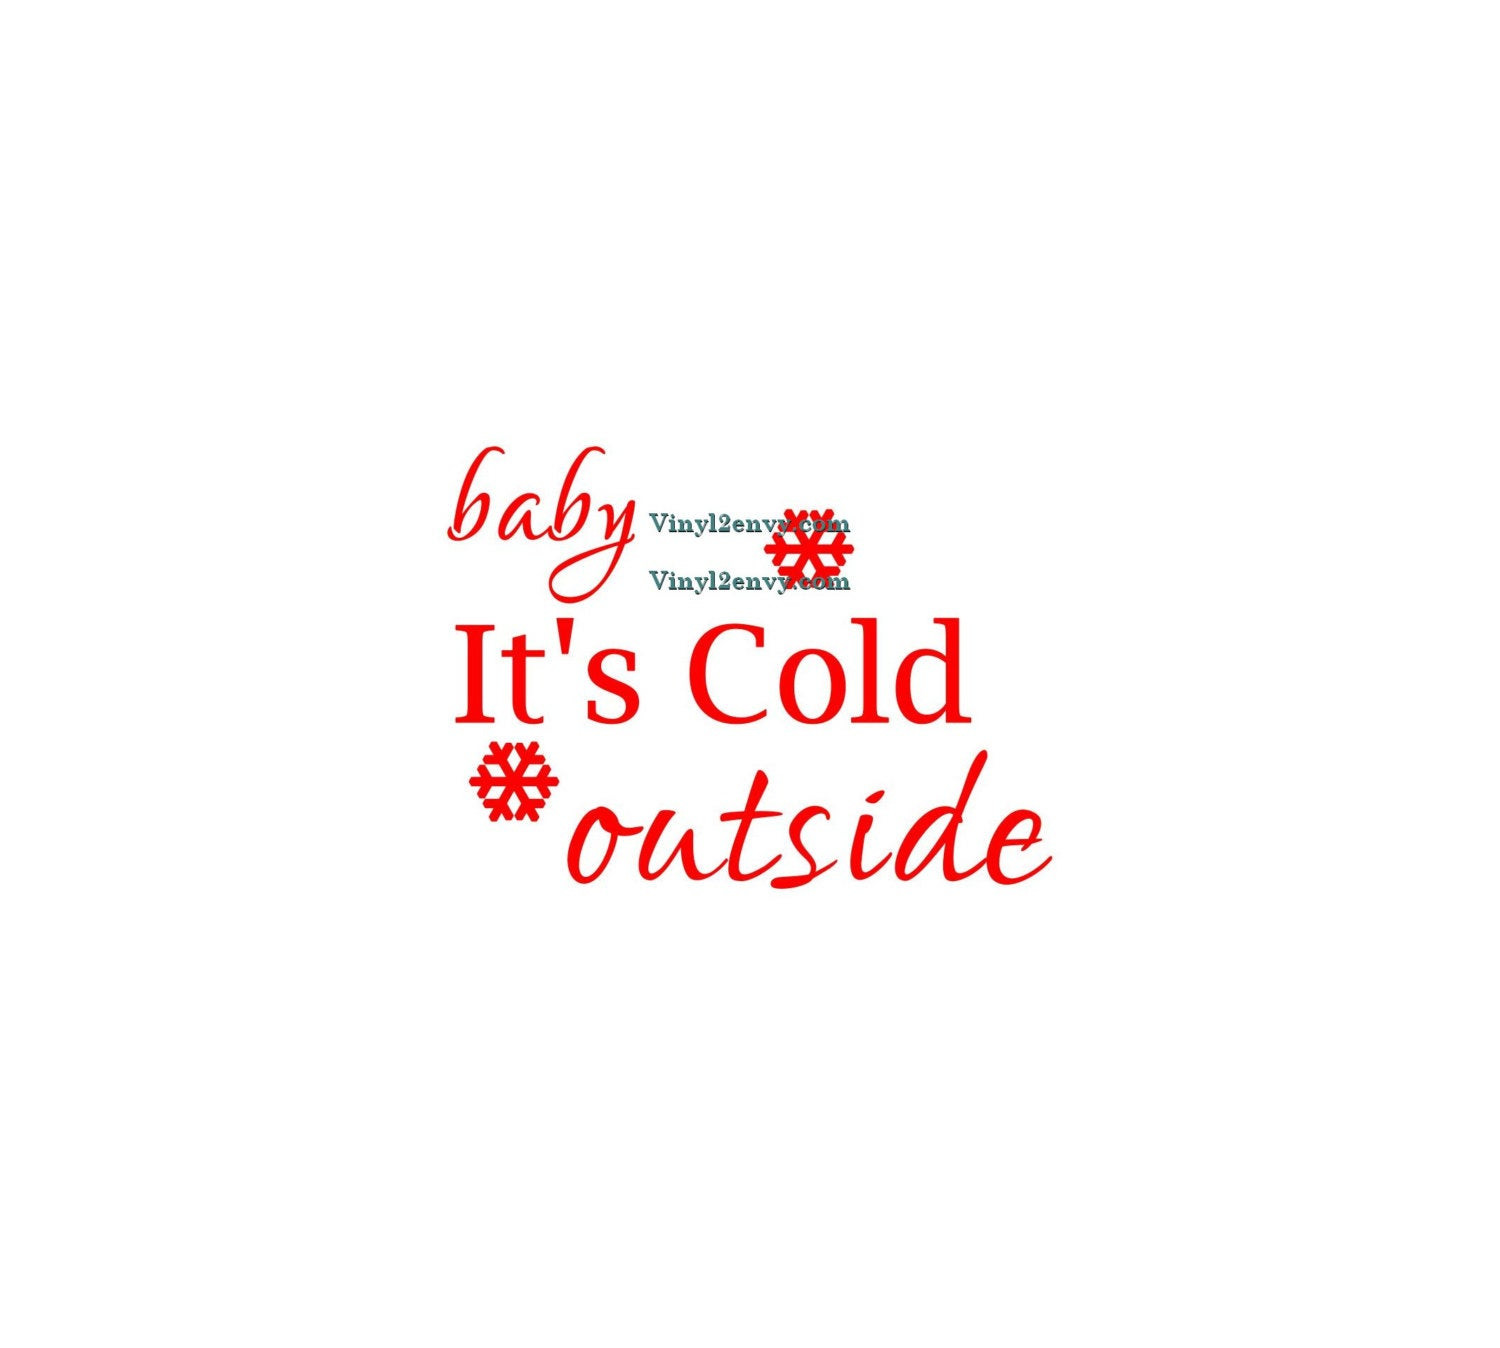 Baby It'S Cold Outside Quotes
 Baby It s Cold Outside Wall Decal Vinyl Wall by Vinyl2Envy